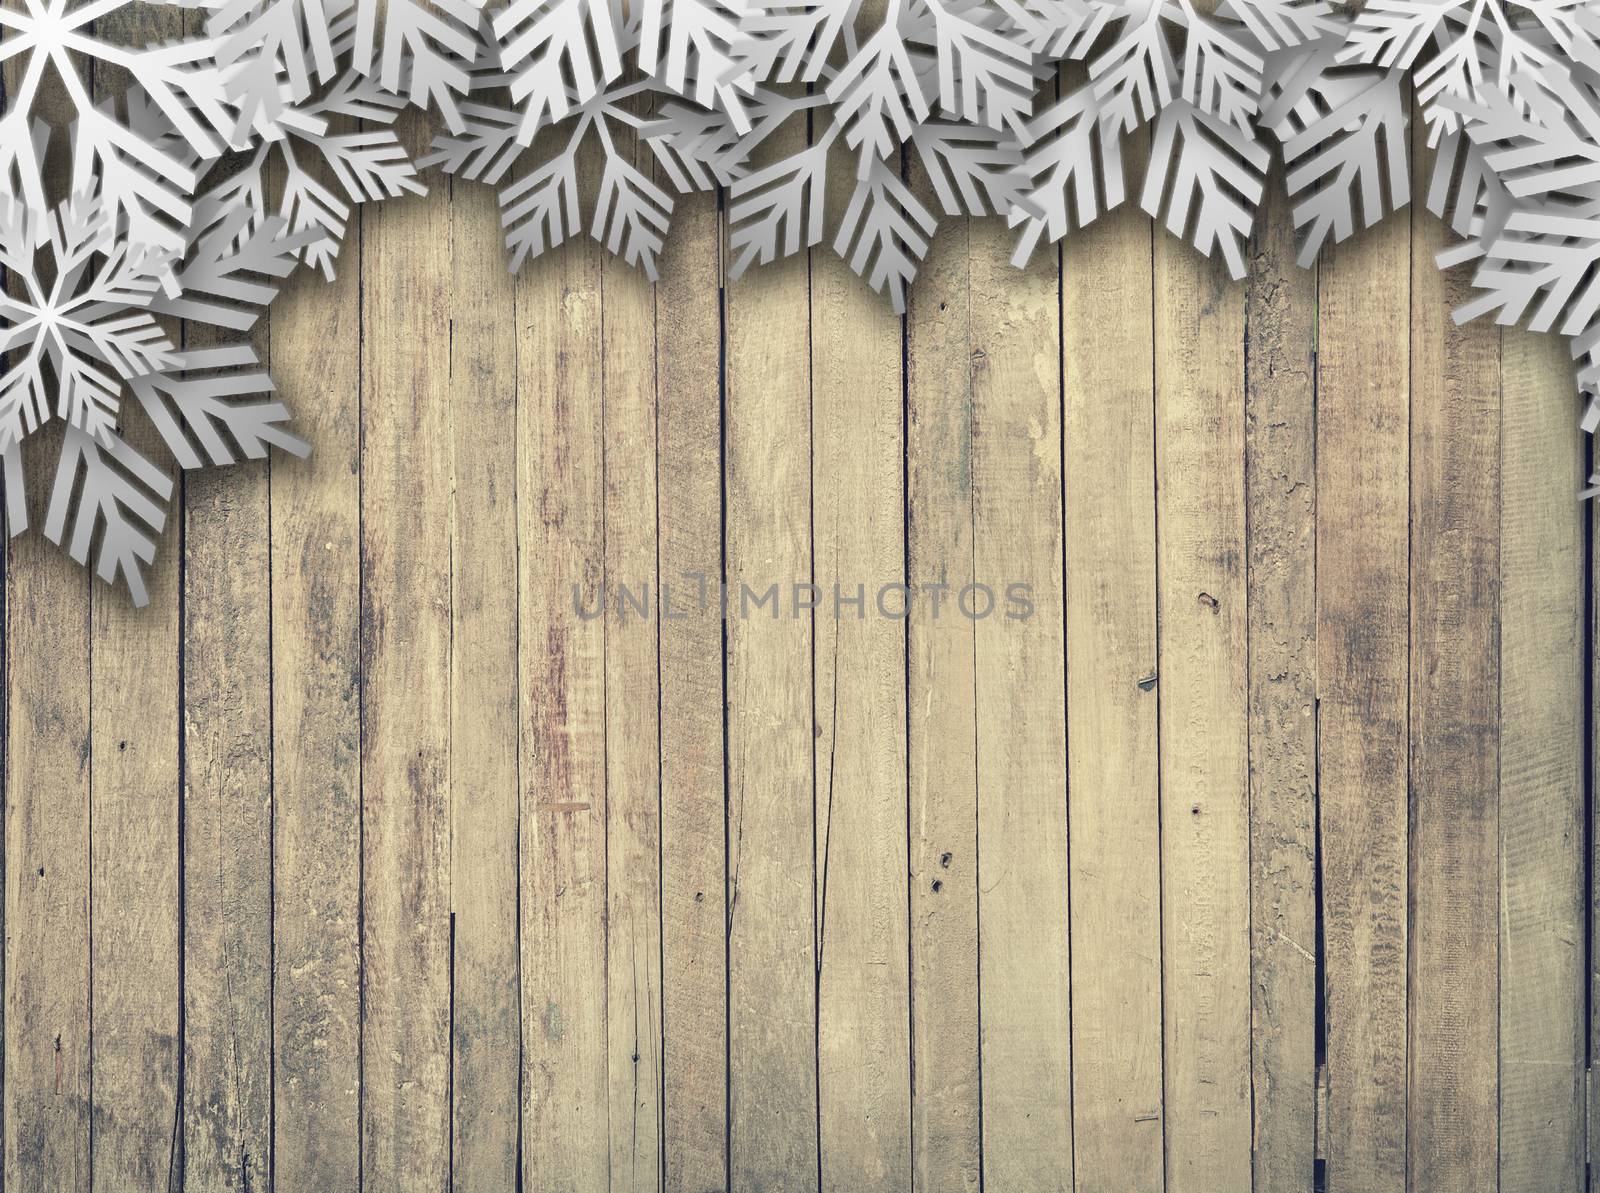 Christmas flakes for background in colors by osvaldo_medina